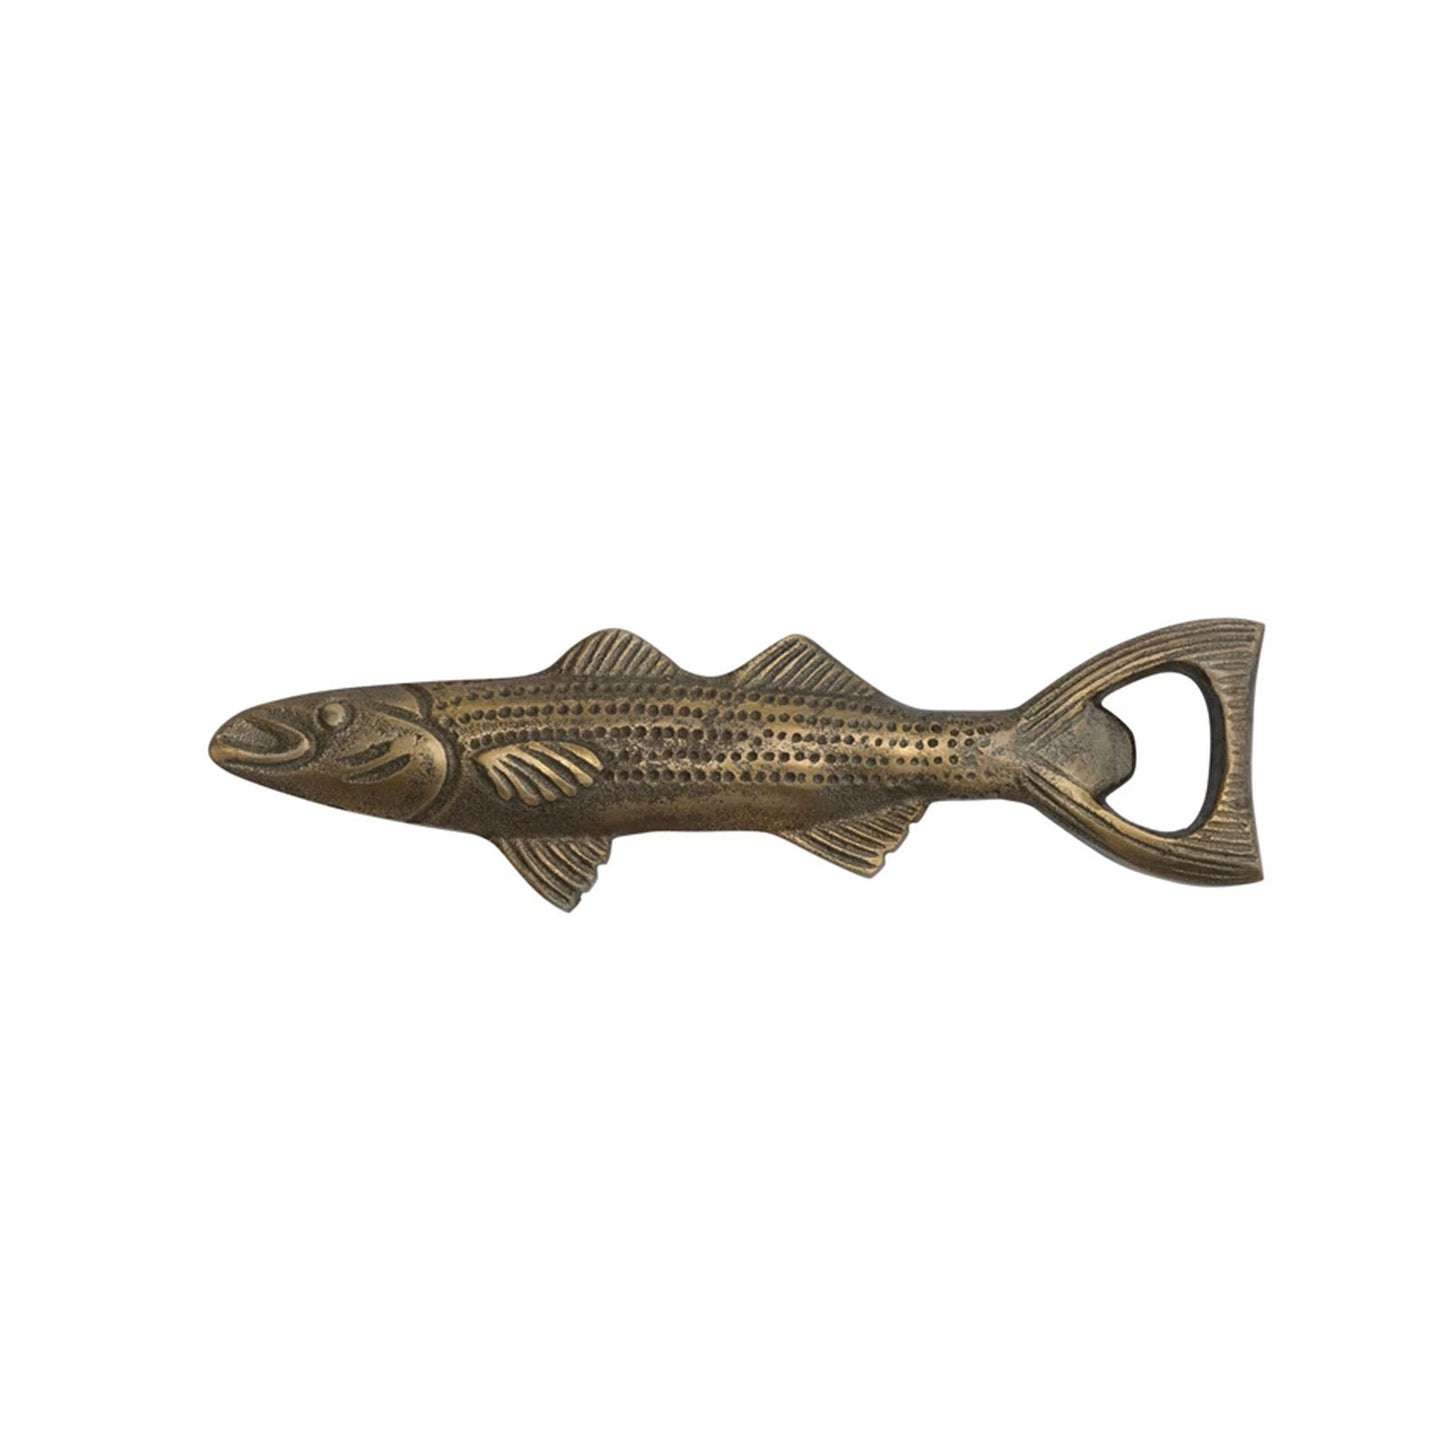 Fish Shaped Bottle Opener in Antique Gold Finish